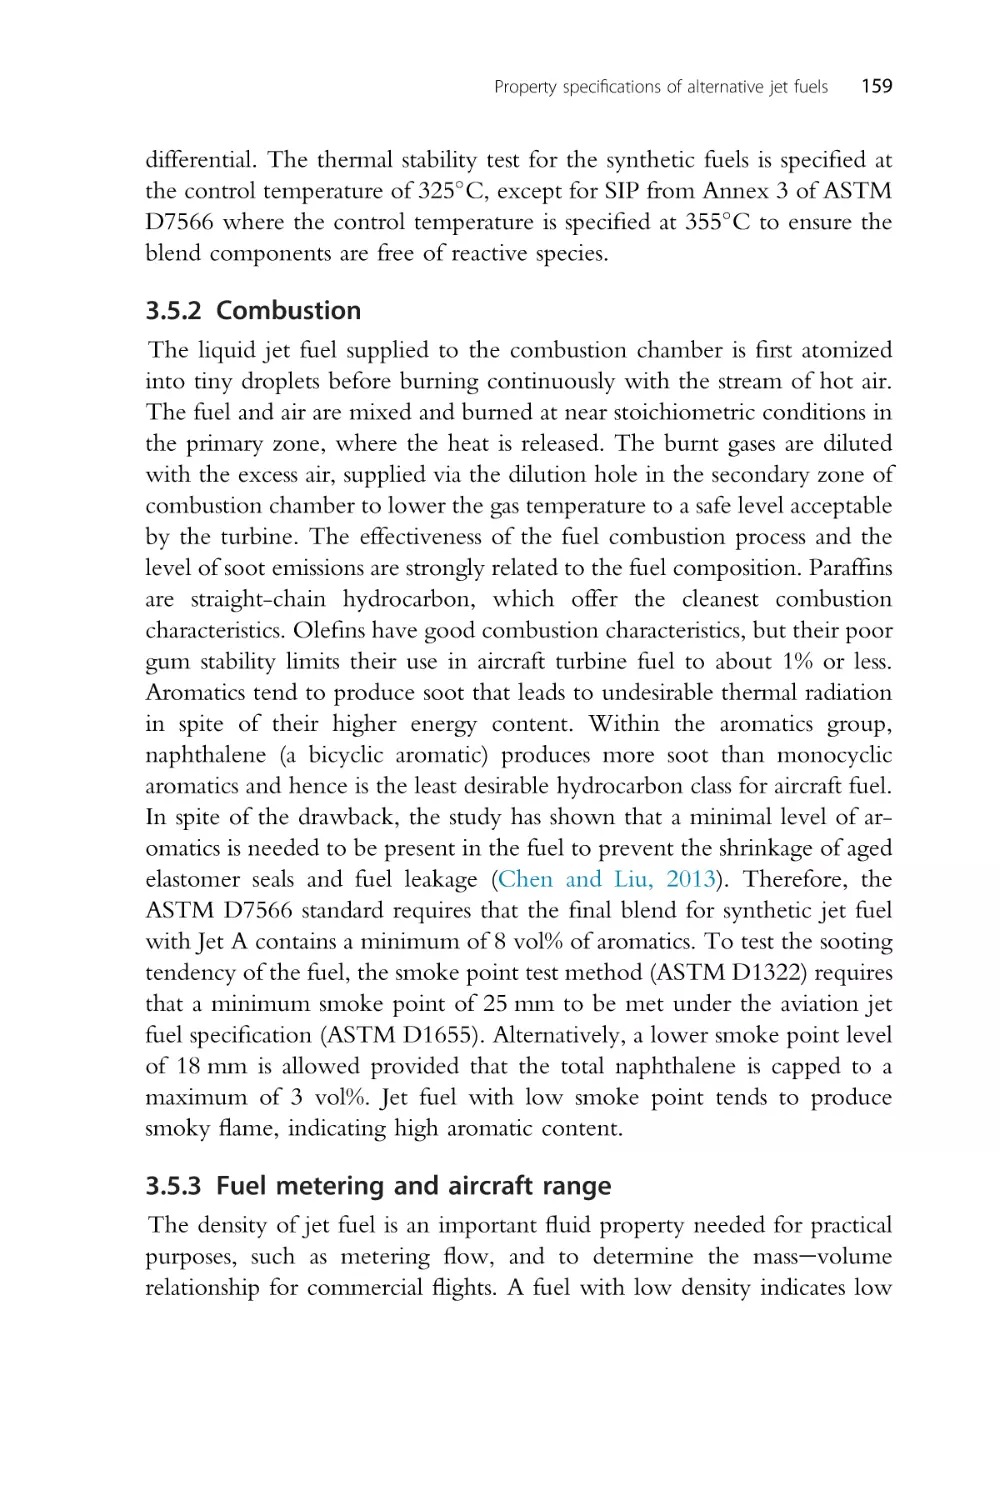 3.5.2 Combustion
3.5.3 Fuel metering and aircraft range